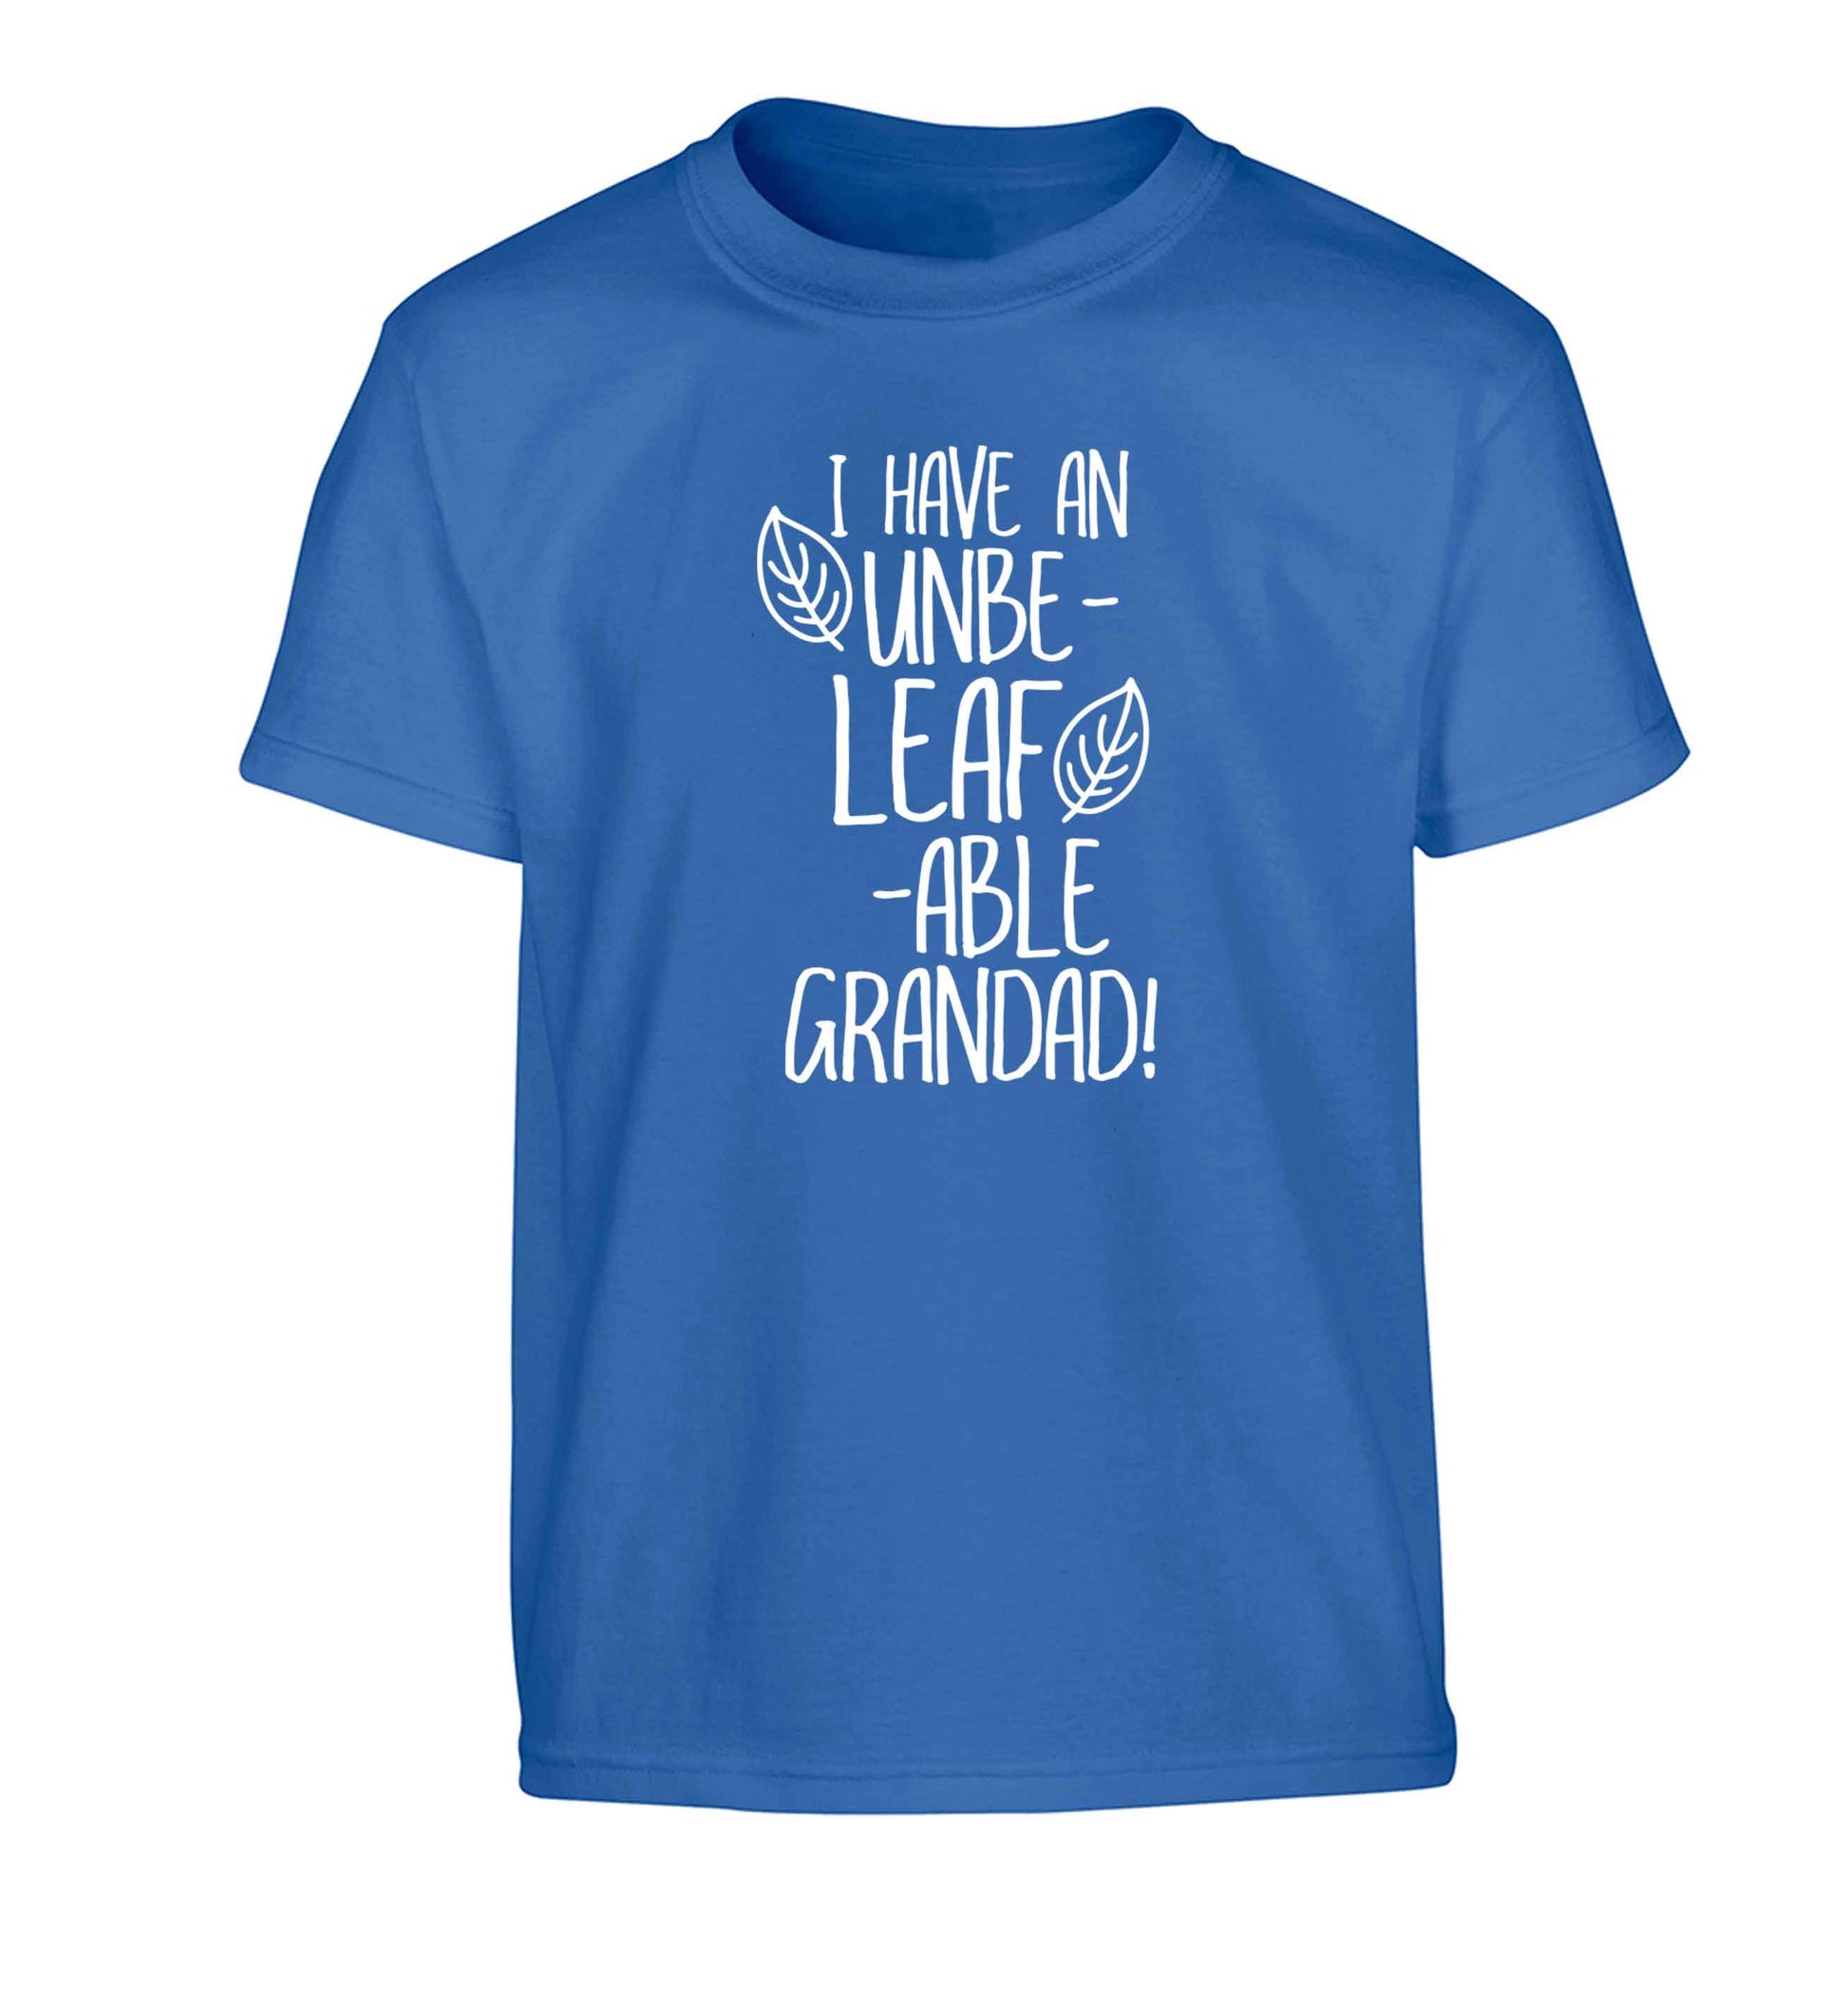 I have an unbe-leaf-able grandad Children's blue Tshirt 12-13 Years